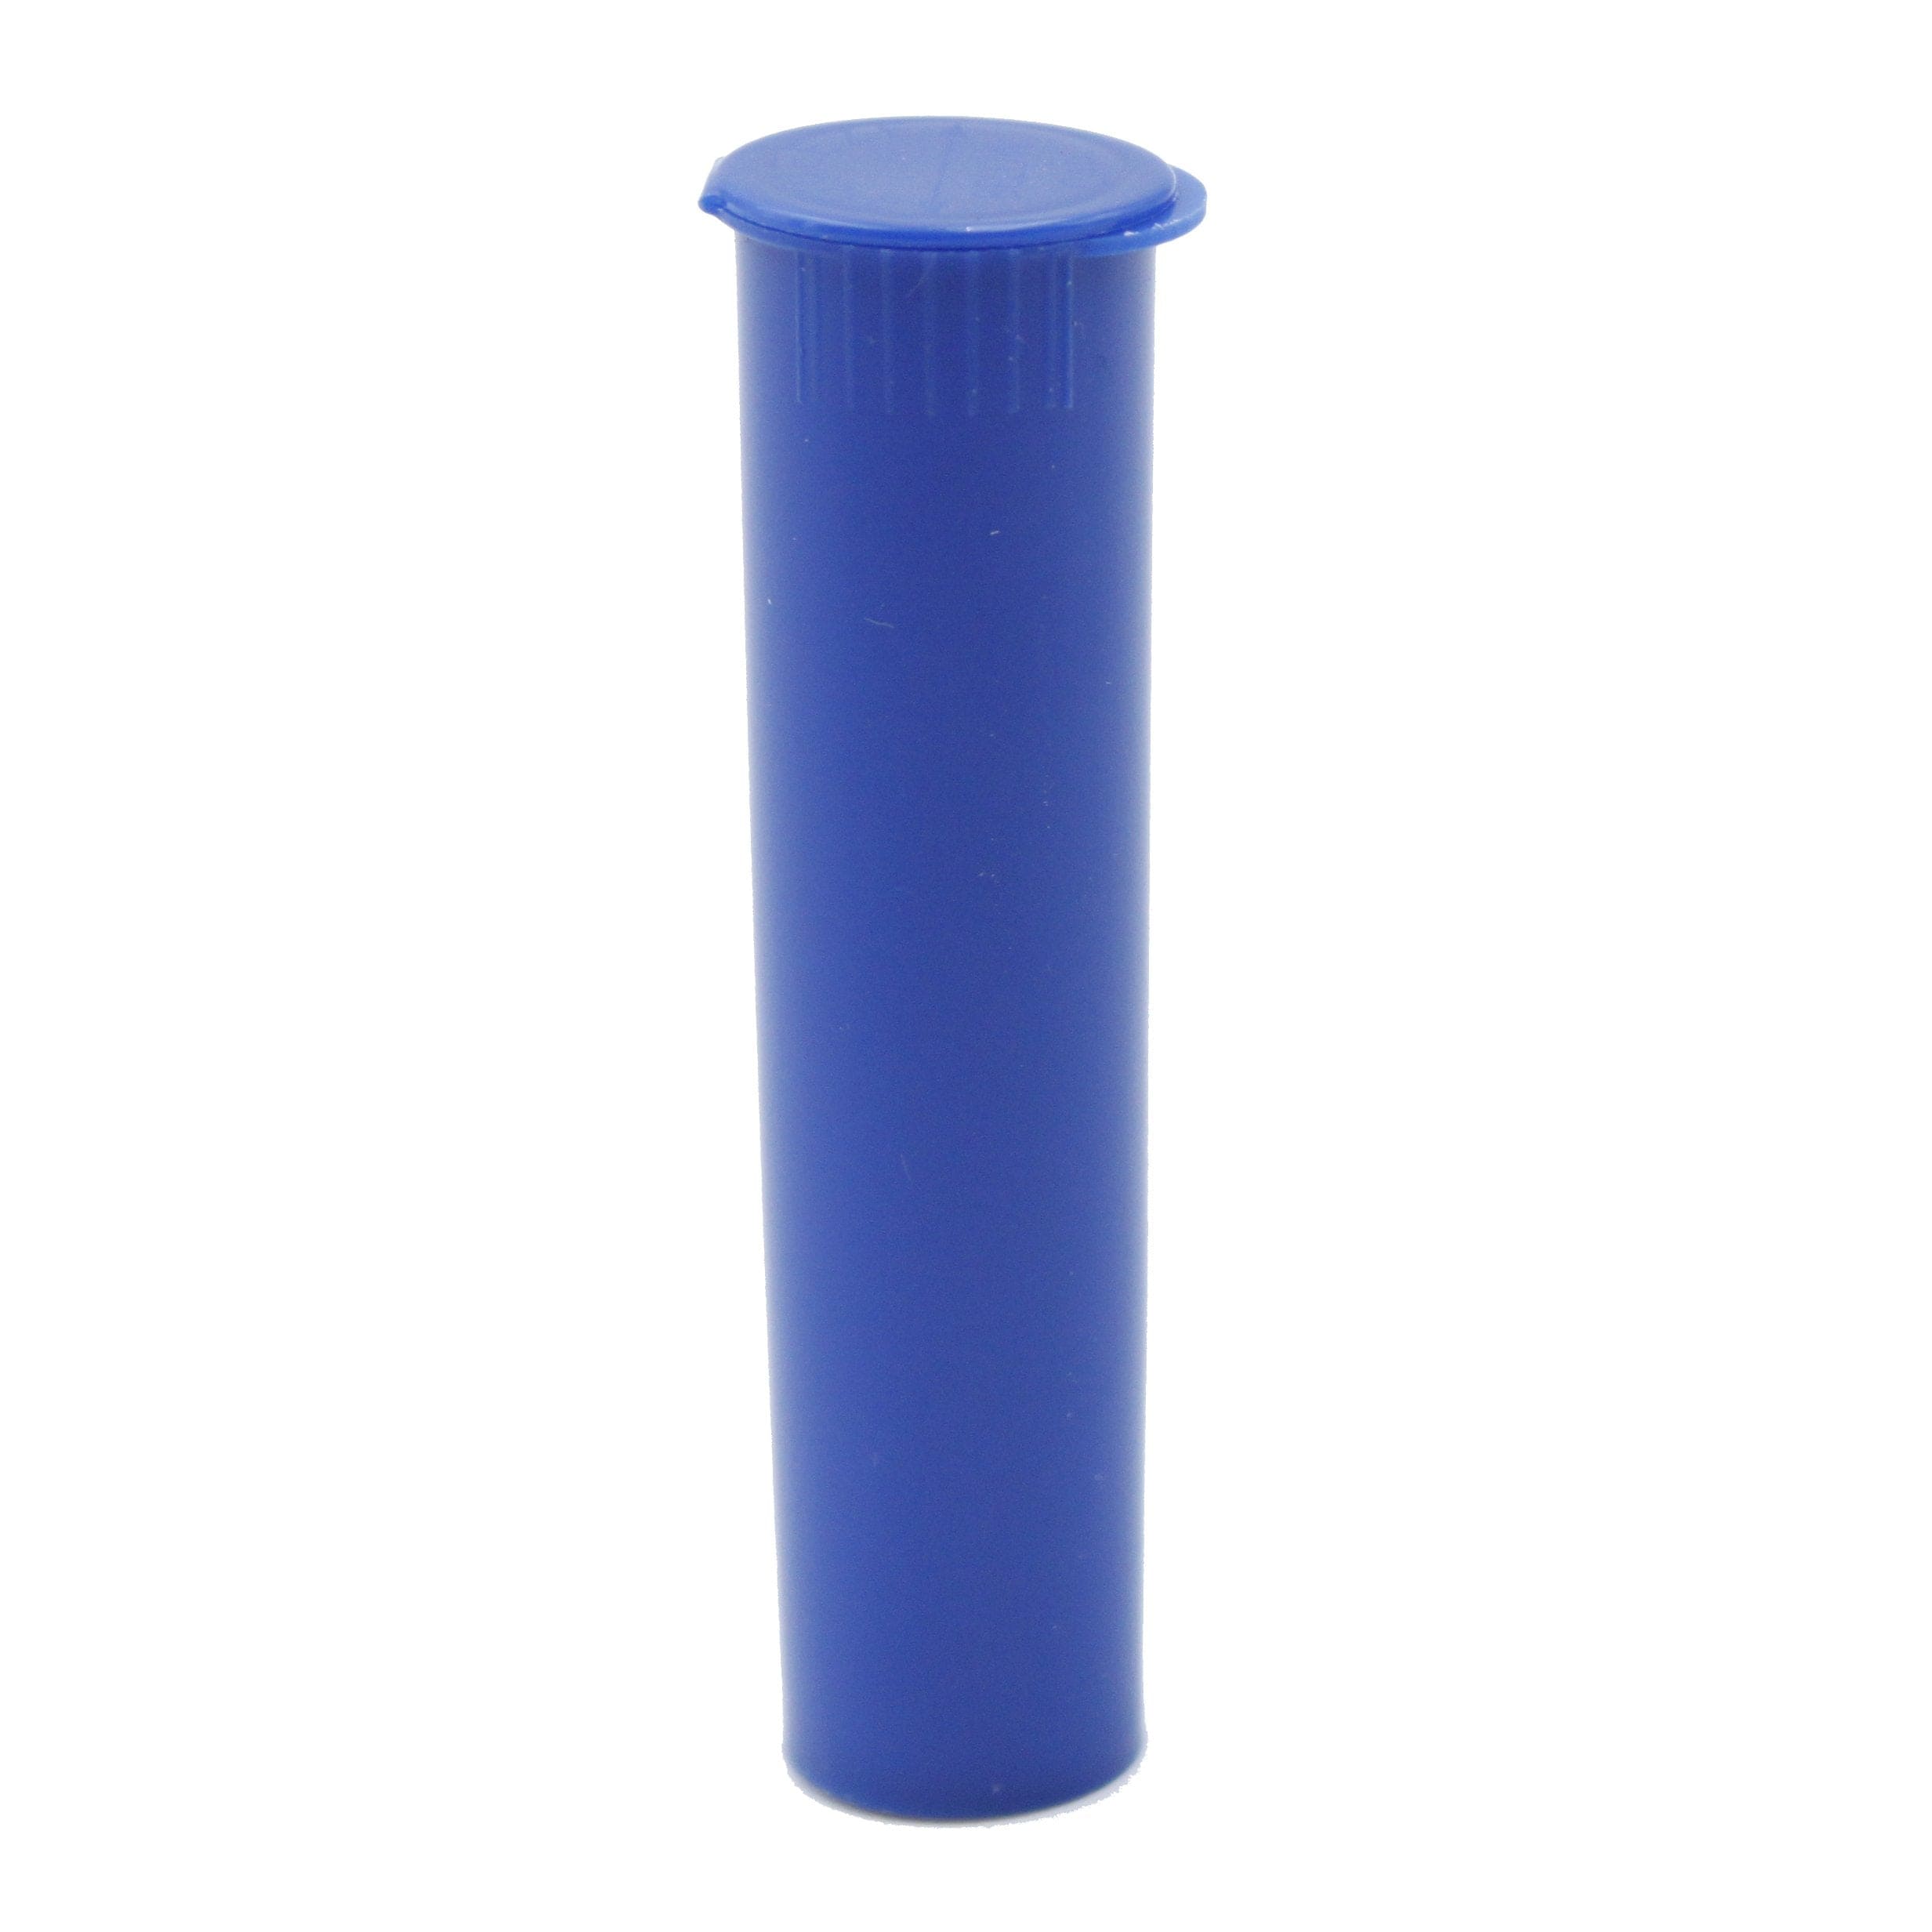 Clearance Squeeze Top Child-Resistant Pre-Roll Tube | 78 mm Blue / Box of 1000 (Bulk Pricing)